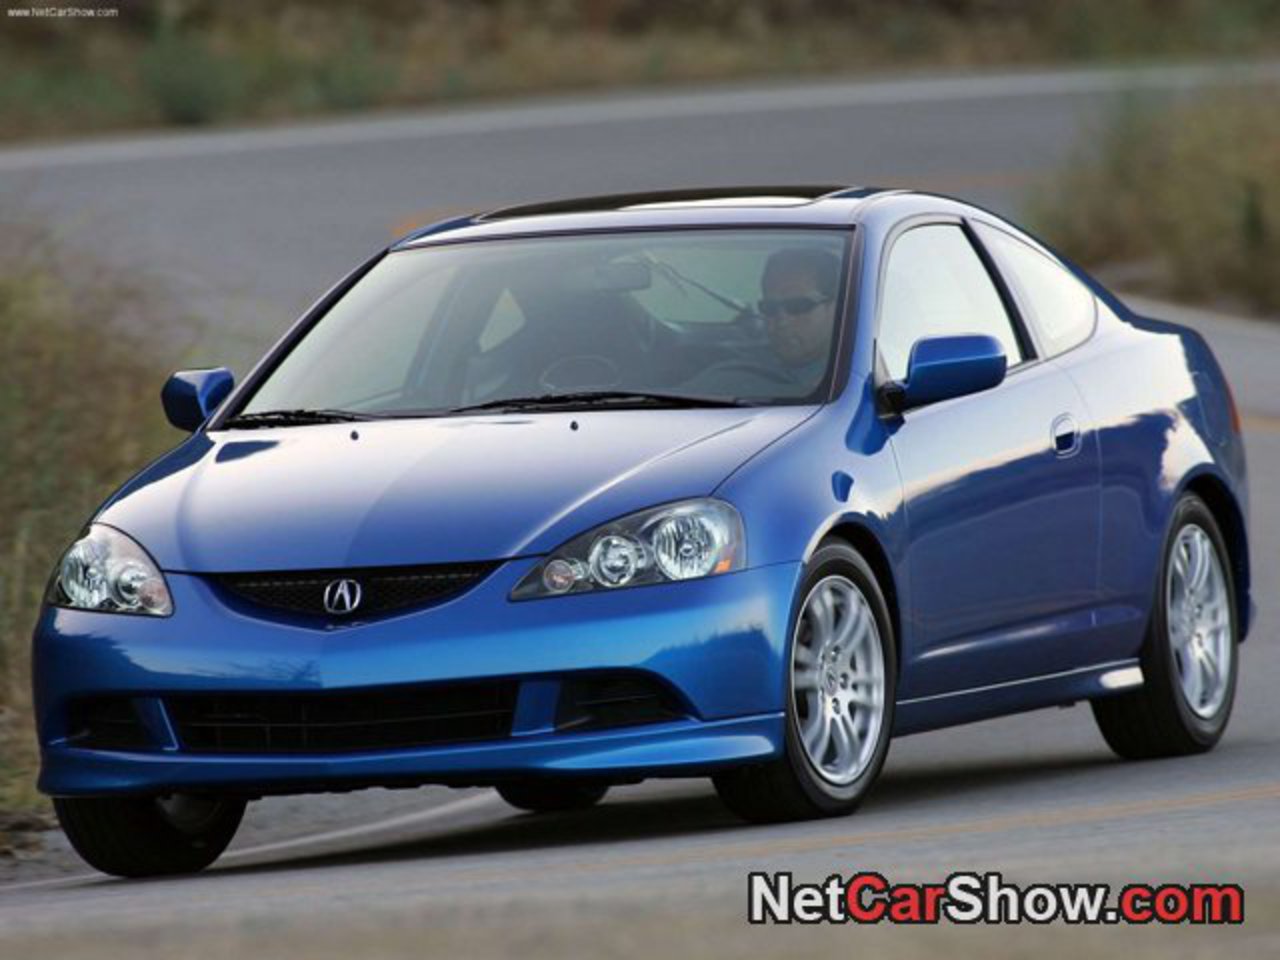 Acura RSX picture # 02 of 04, Front Angle, MY 2005, 1024x768